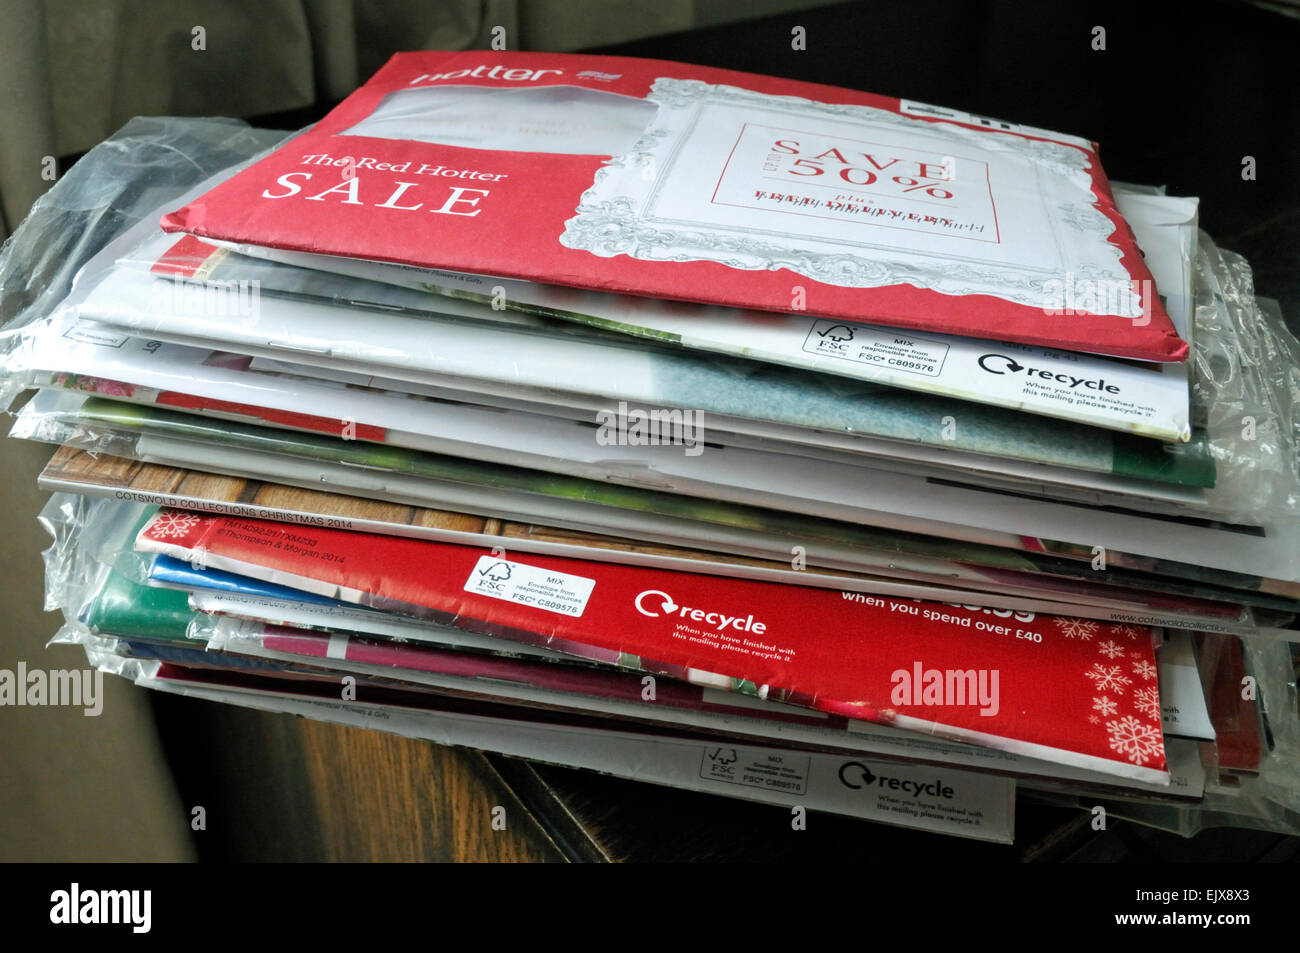 Pile of unopened envelopes containing clothing catalogues and showing recycle logo London, UK Stock Photo